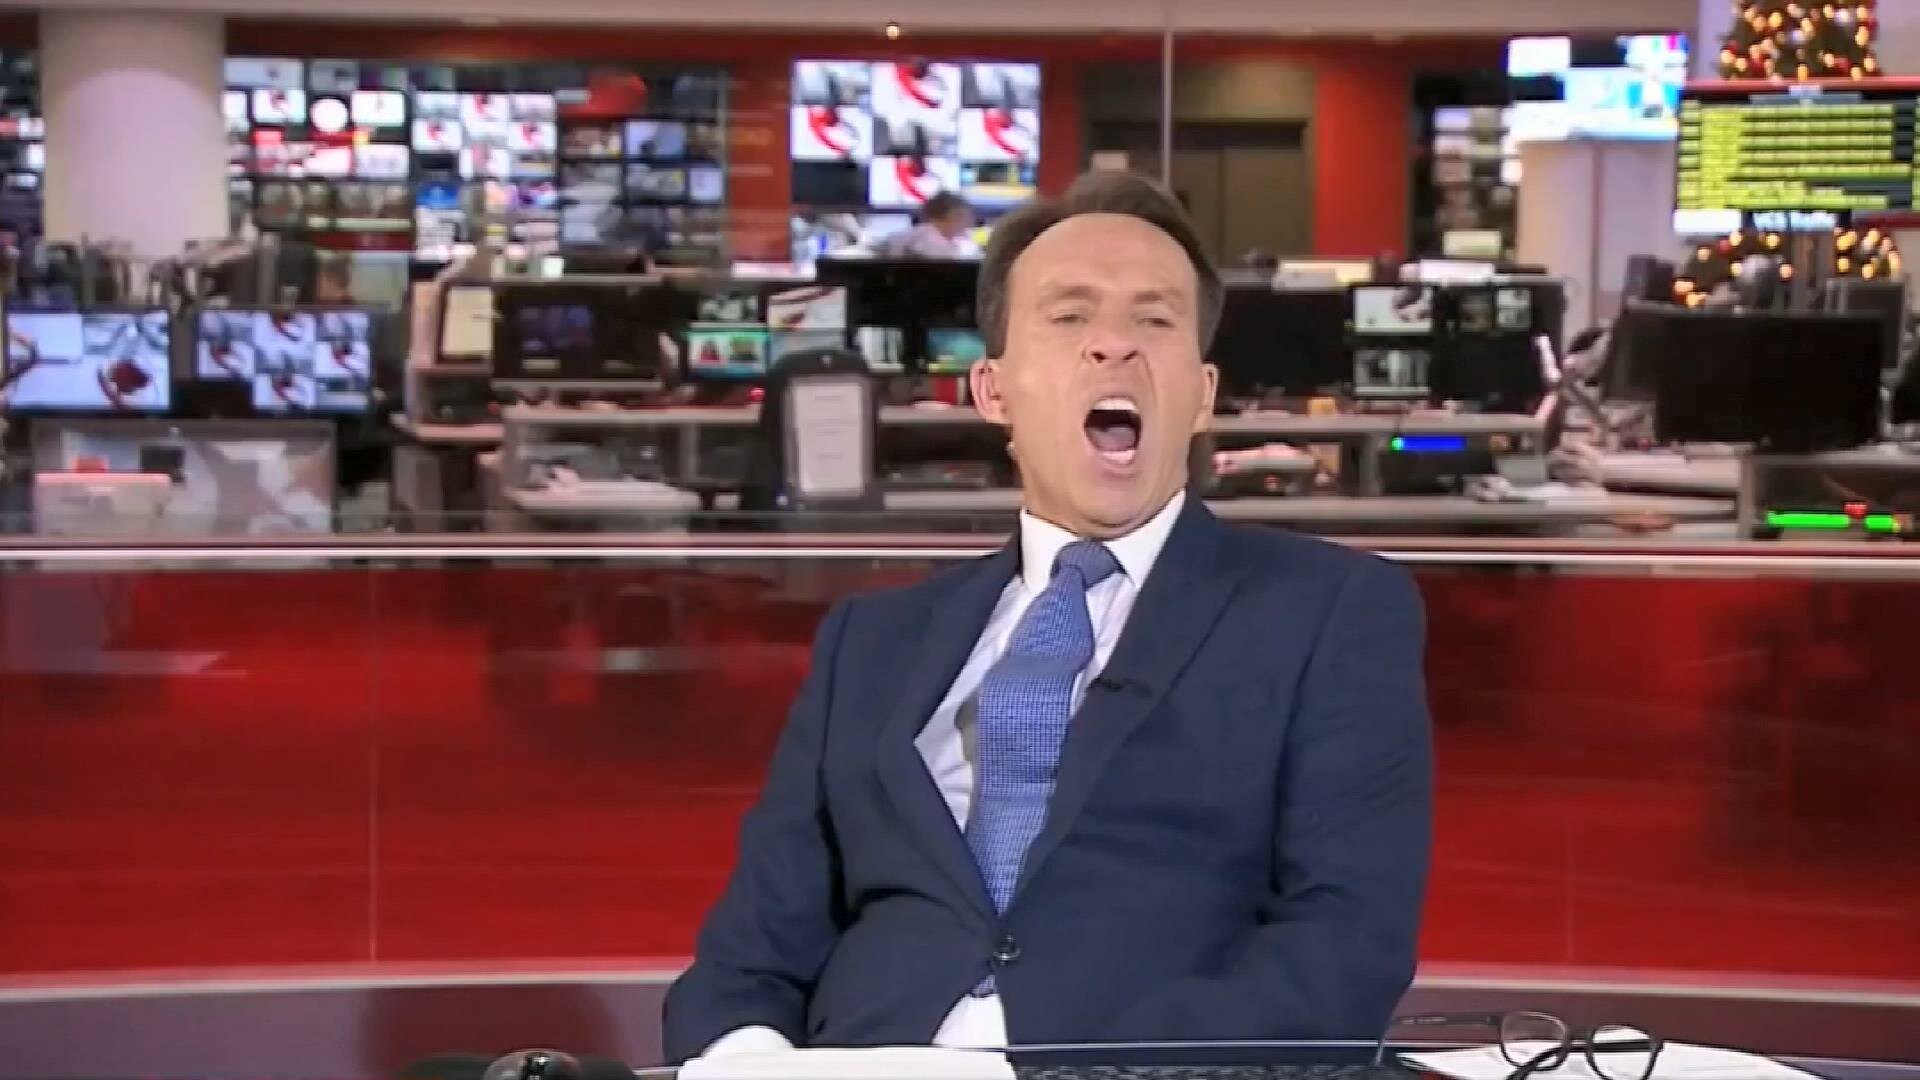 Bbc News Anchor Apologizes To Viewers After Caught Yawning On Air